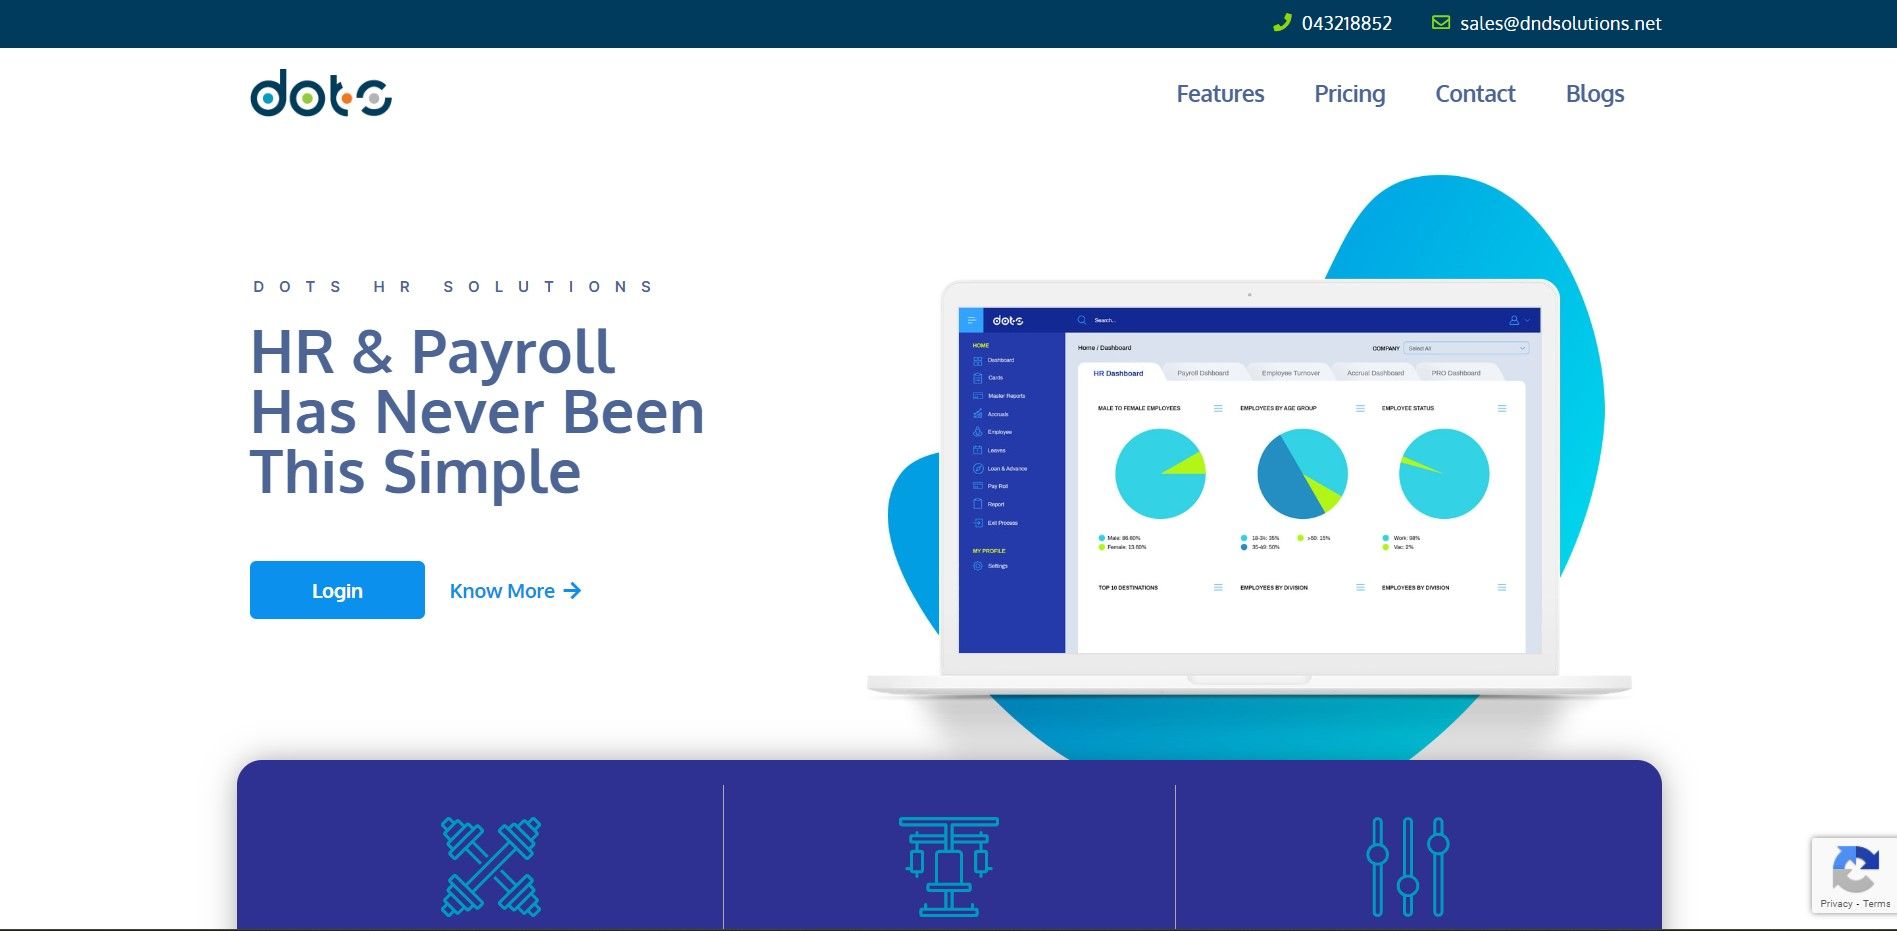 An image of Dots HR mentioning HR and Payroll made simple